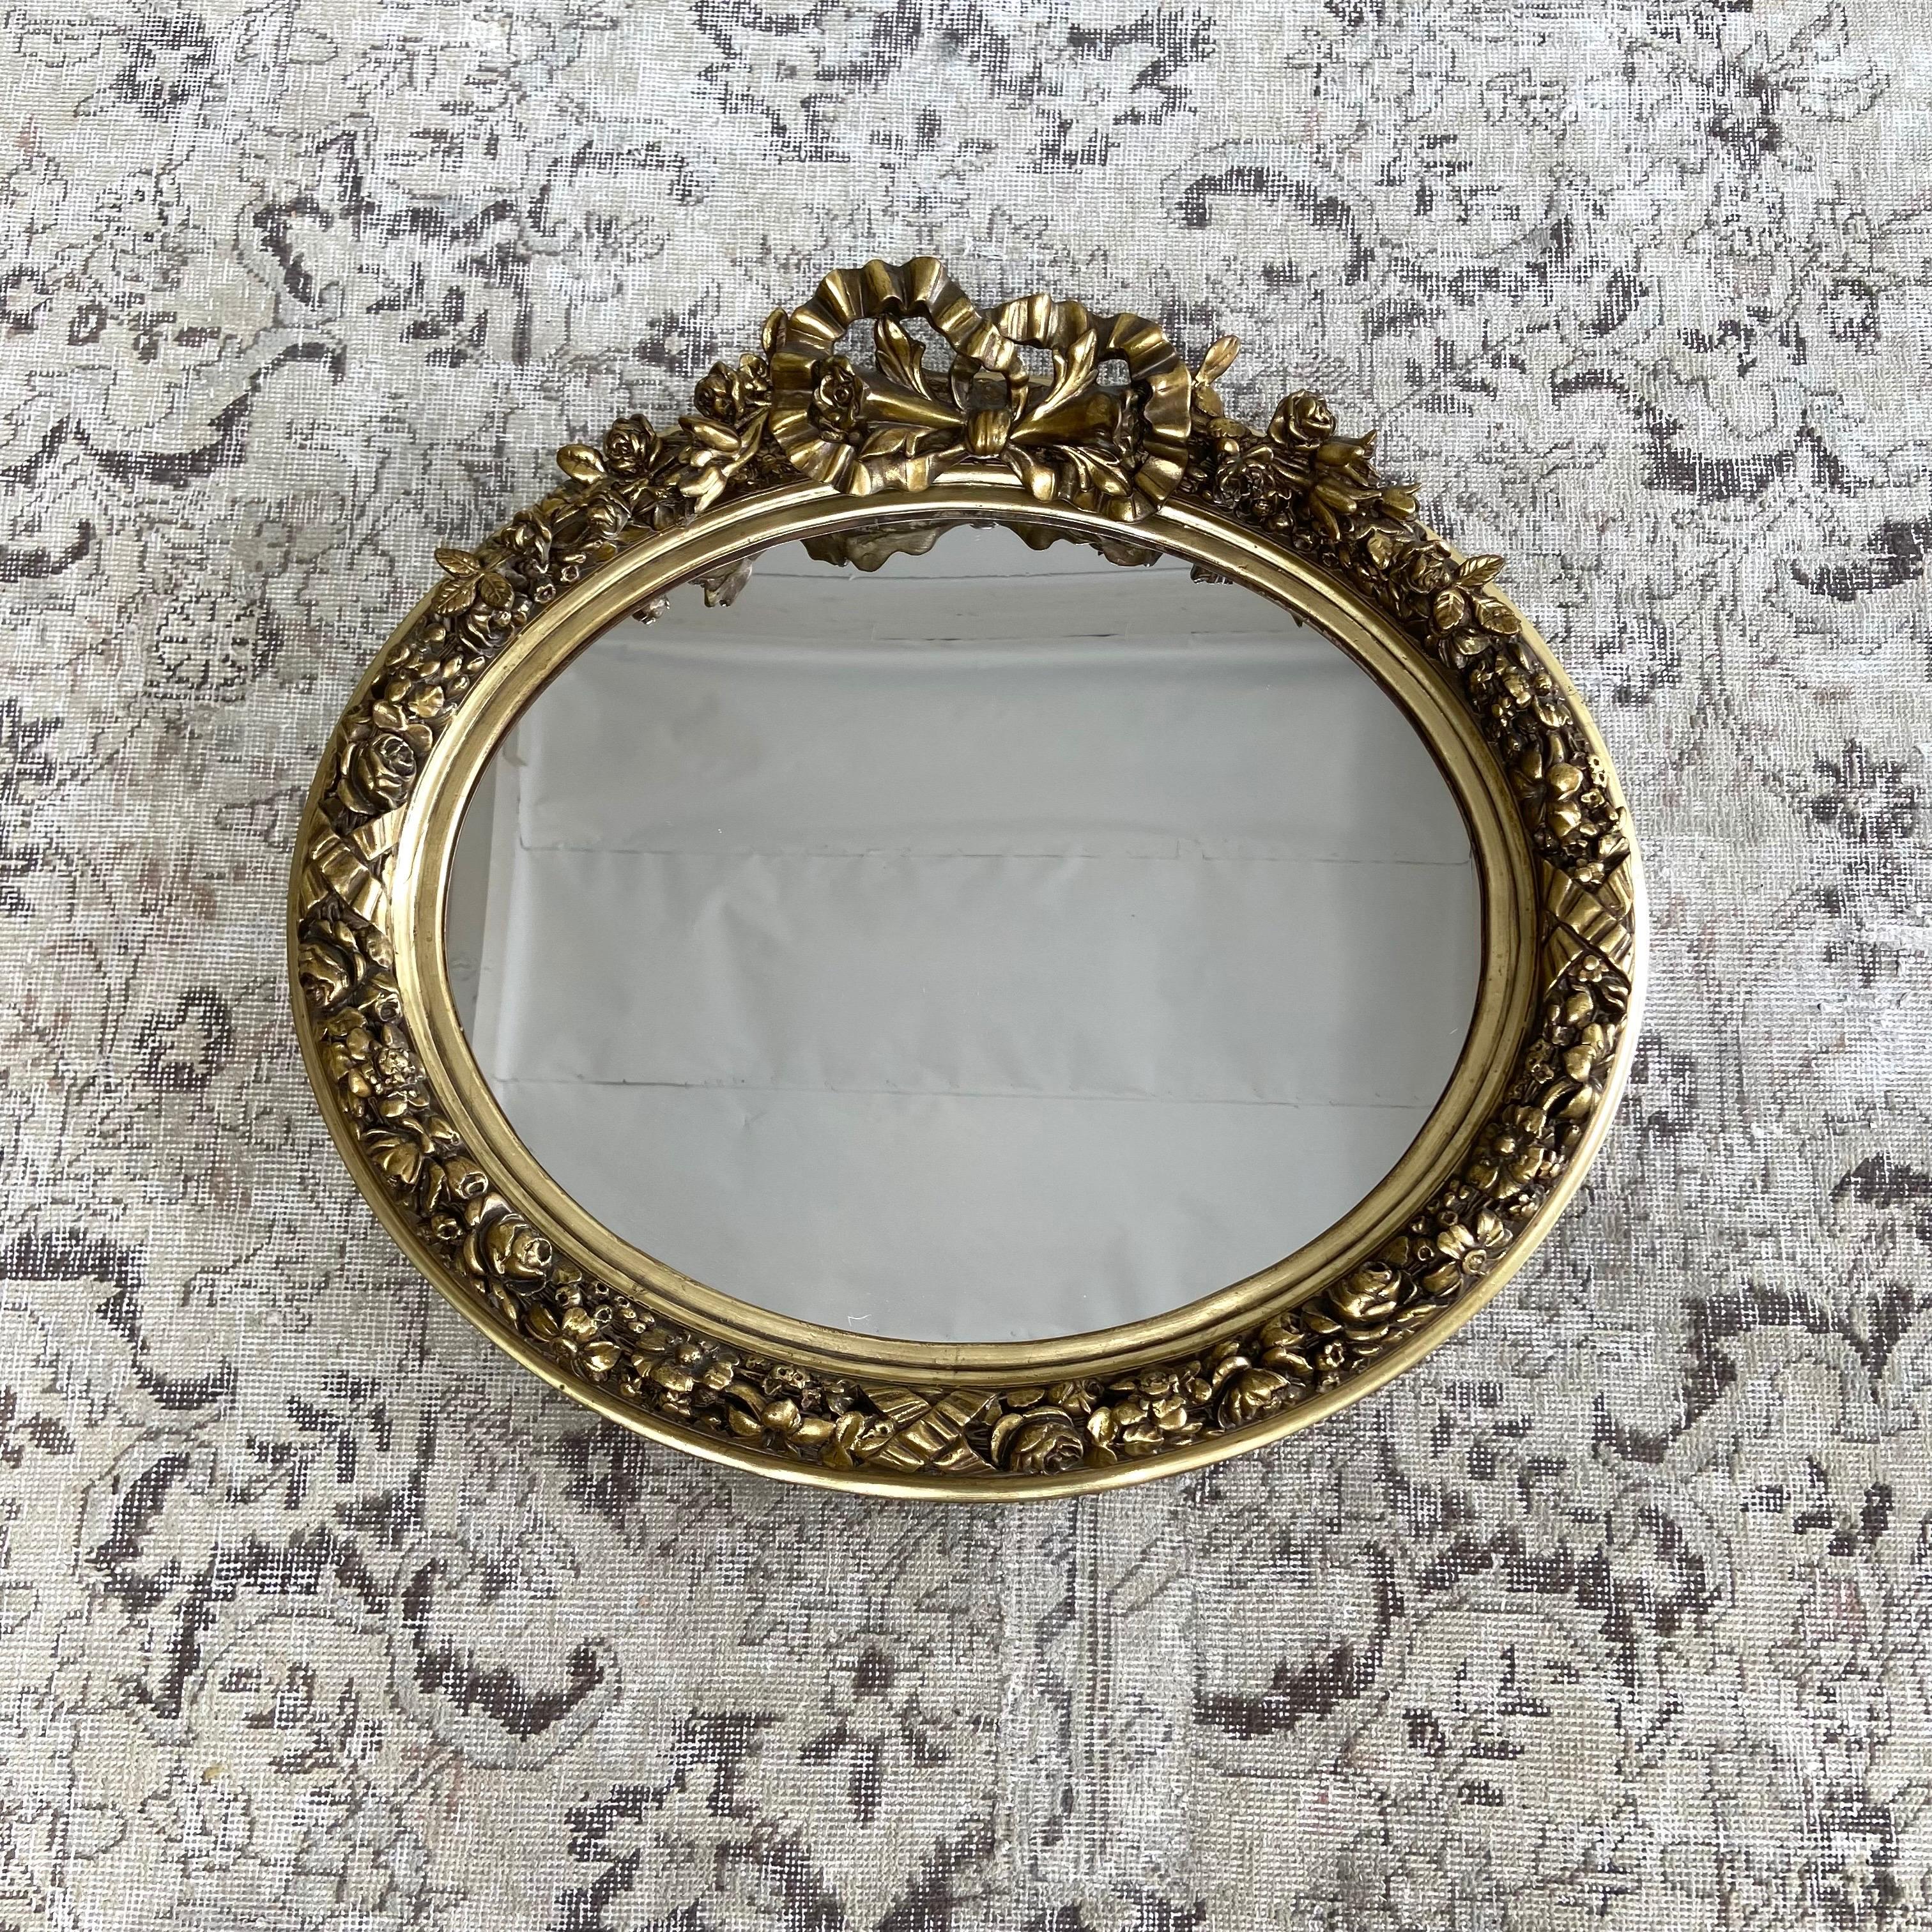 Vintage Style French Gilt wood wall mirror with ribbon and roses.
Please see quantity availability. 
Mirror is new condition, with no flaws.
Size:28”w x 25”h.